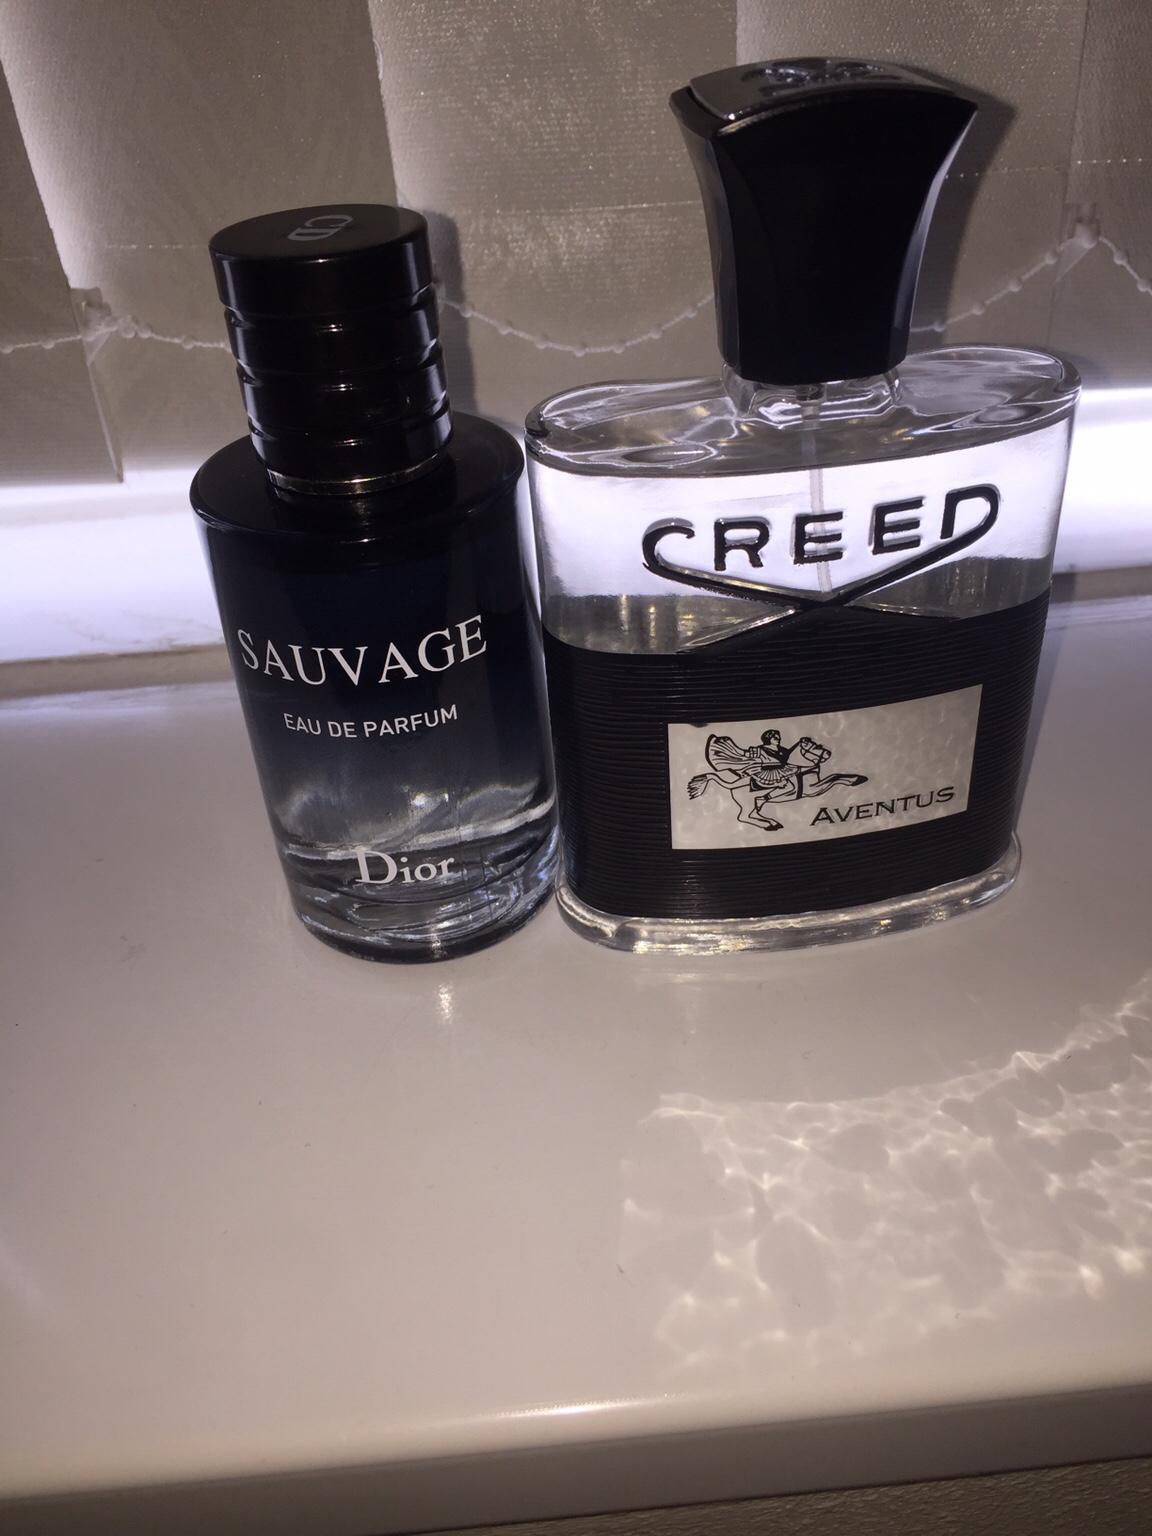 creed sauvage cologne